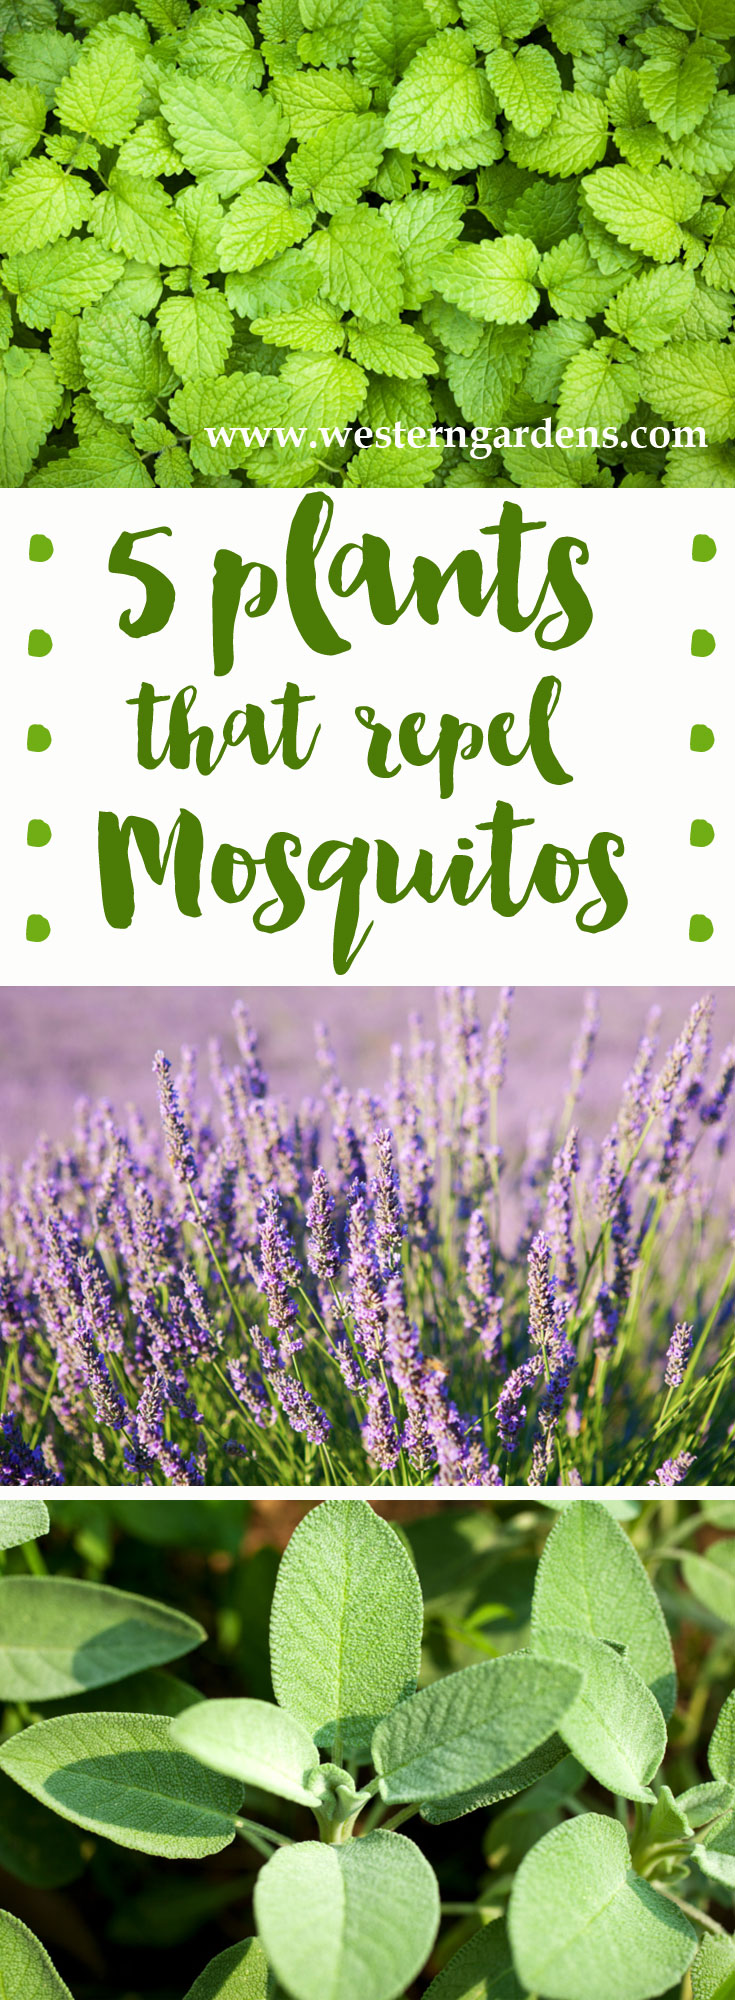 5 Plants that Repel Mosquitoes - www.westerngardens.com